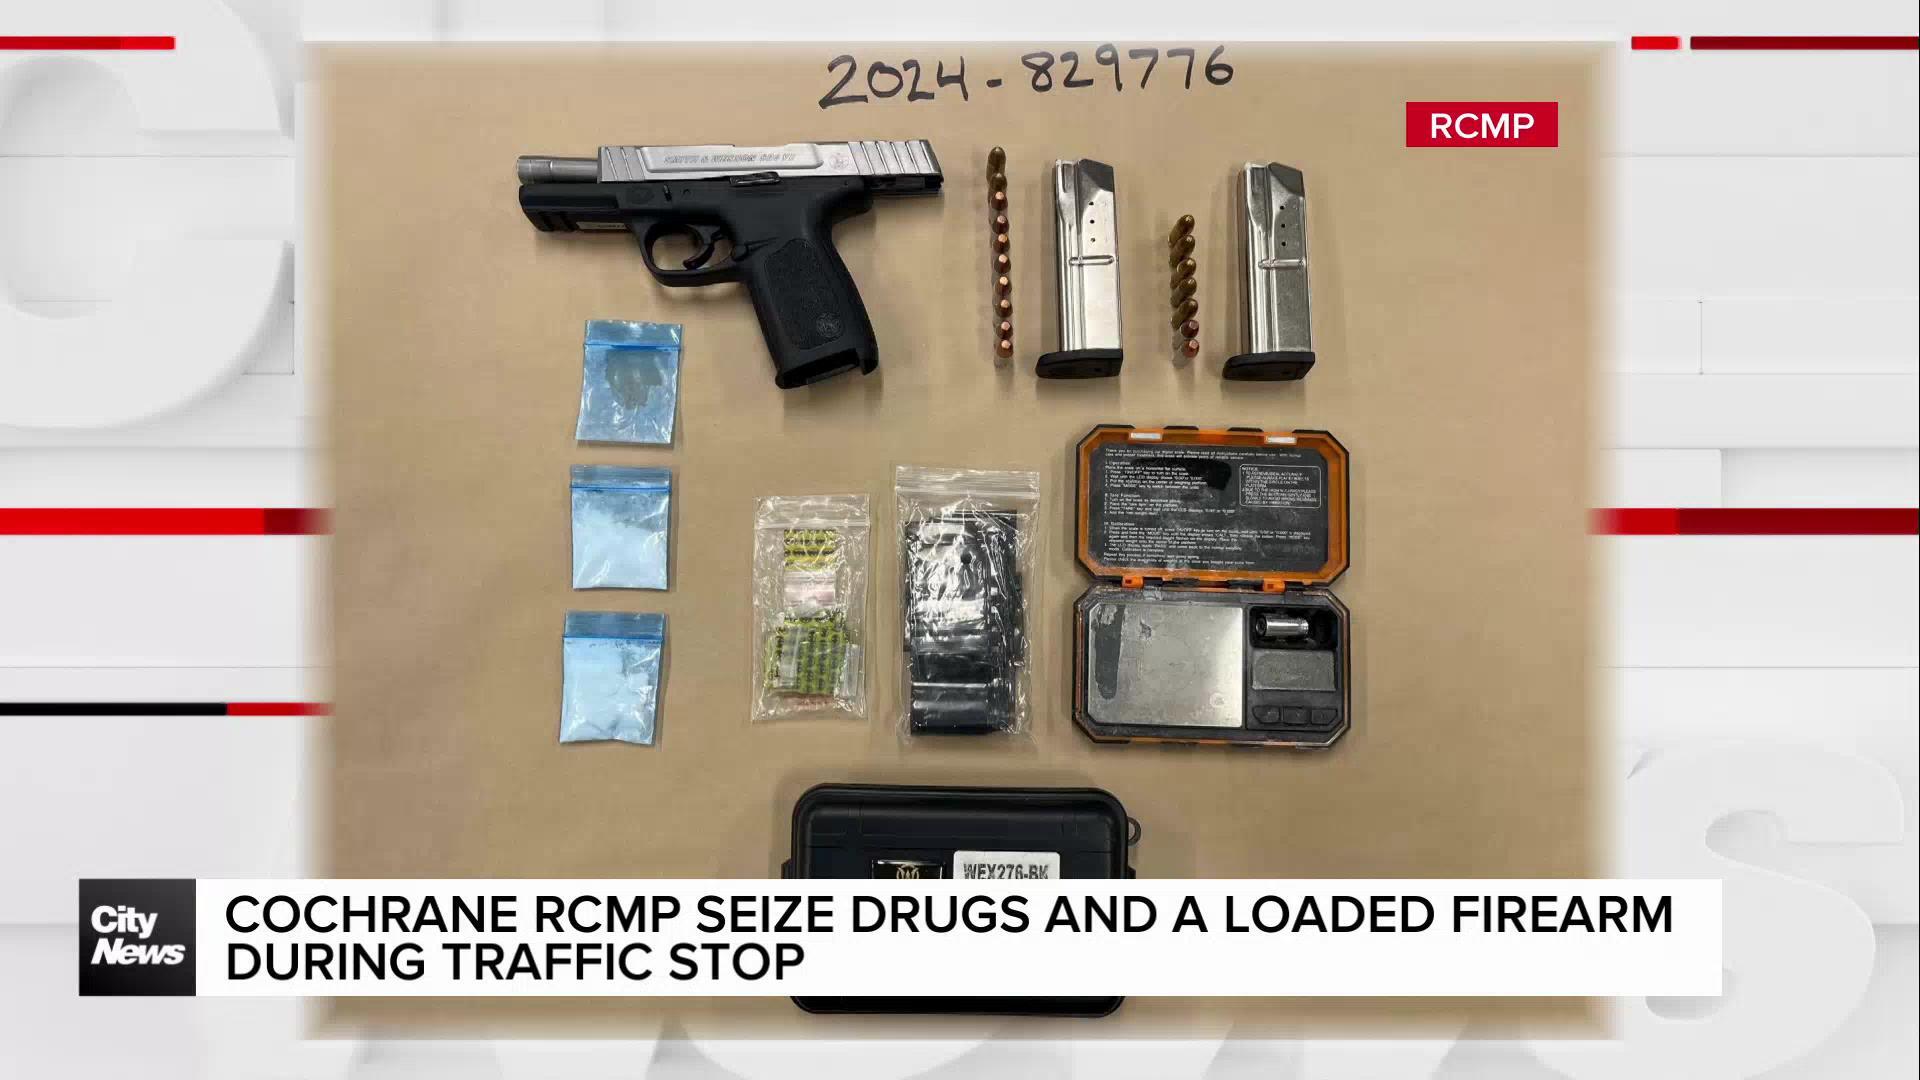 Cochrane RCMP seize drugs and loaded firearm during traffic stop